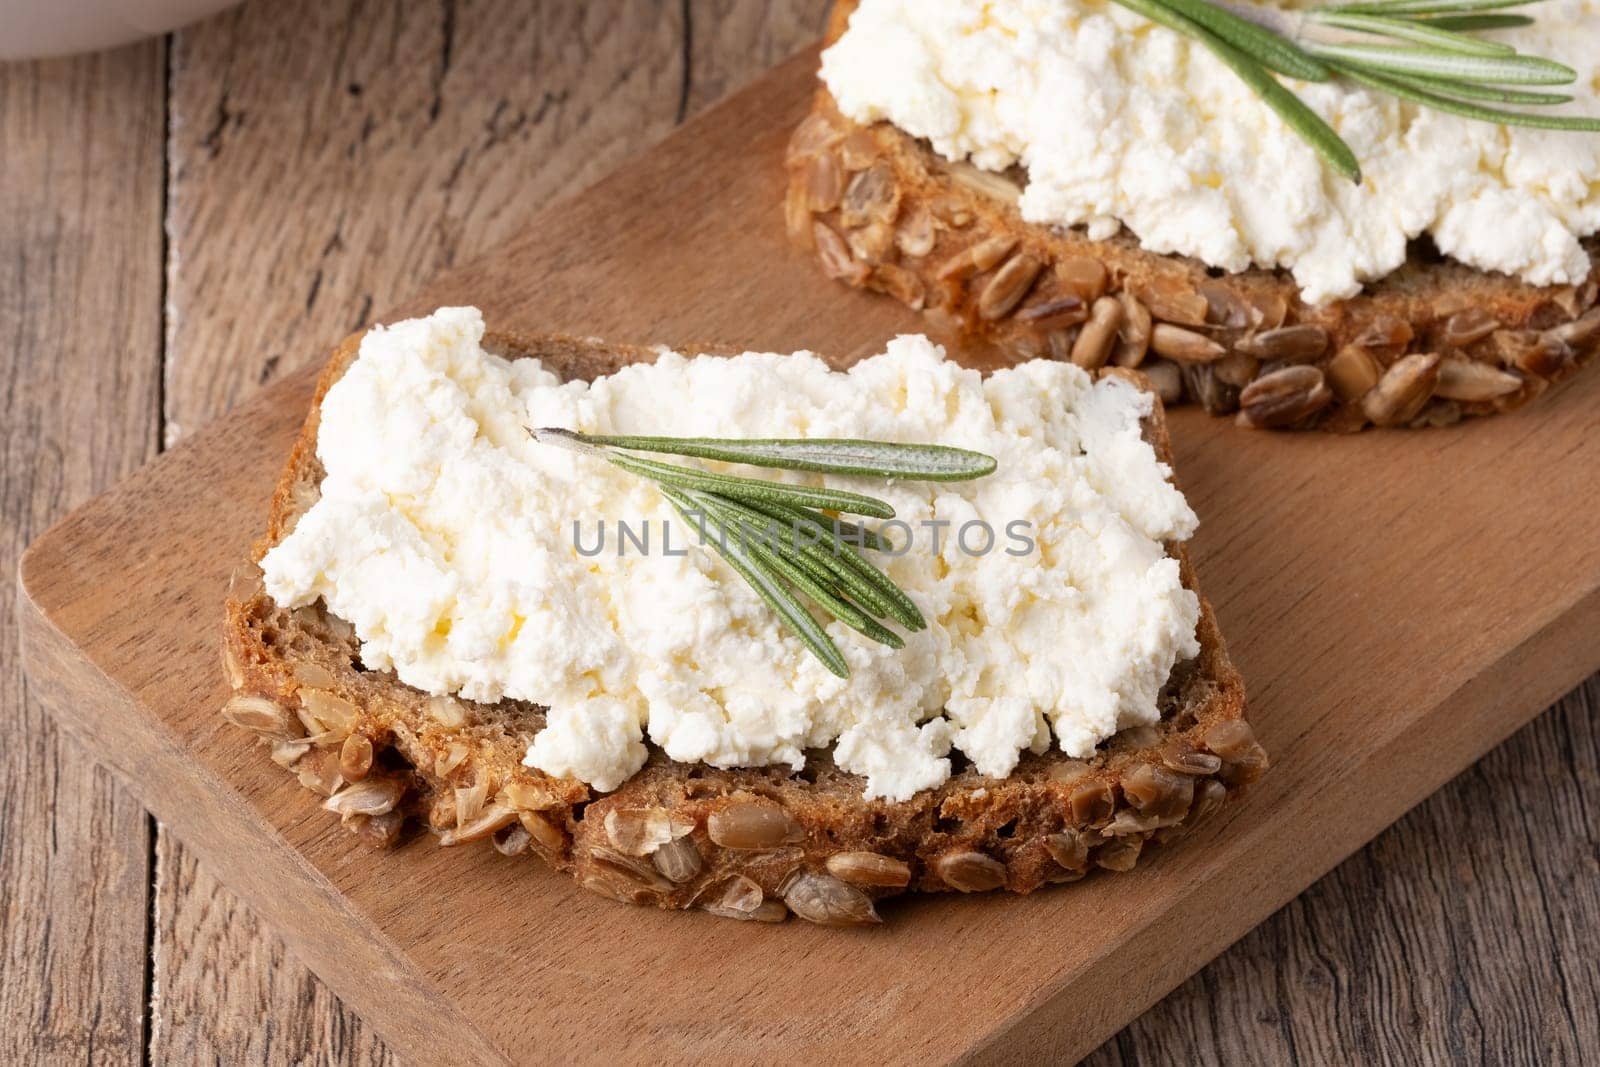 Home made rye bread on a wooden cutting board with curd cheese.